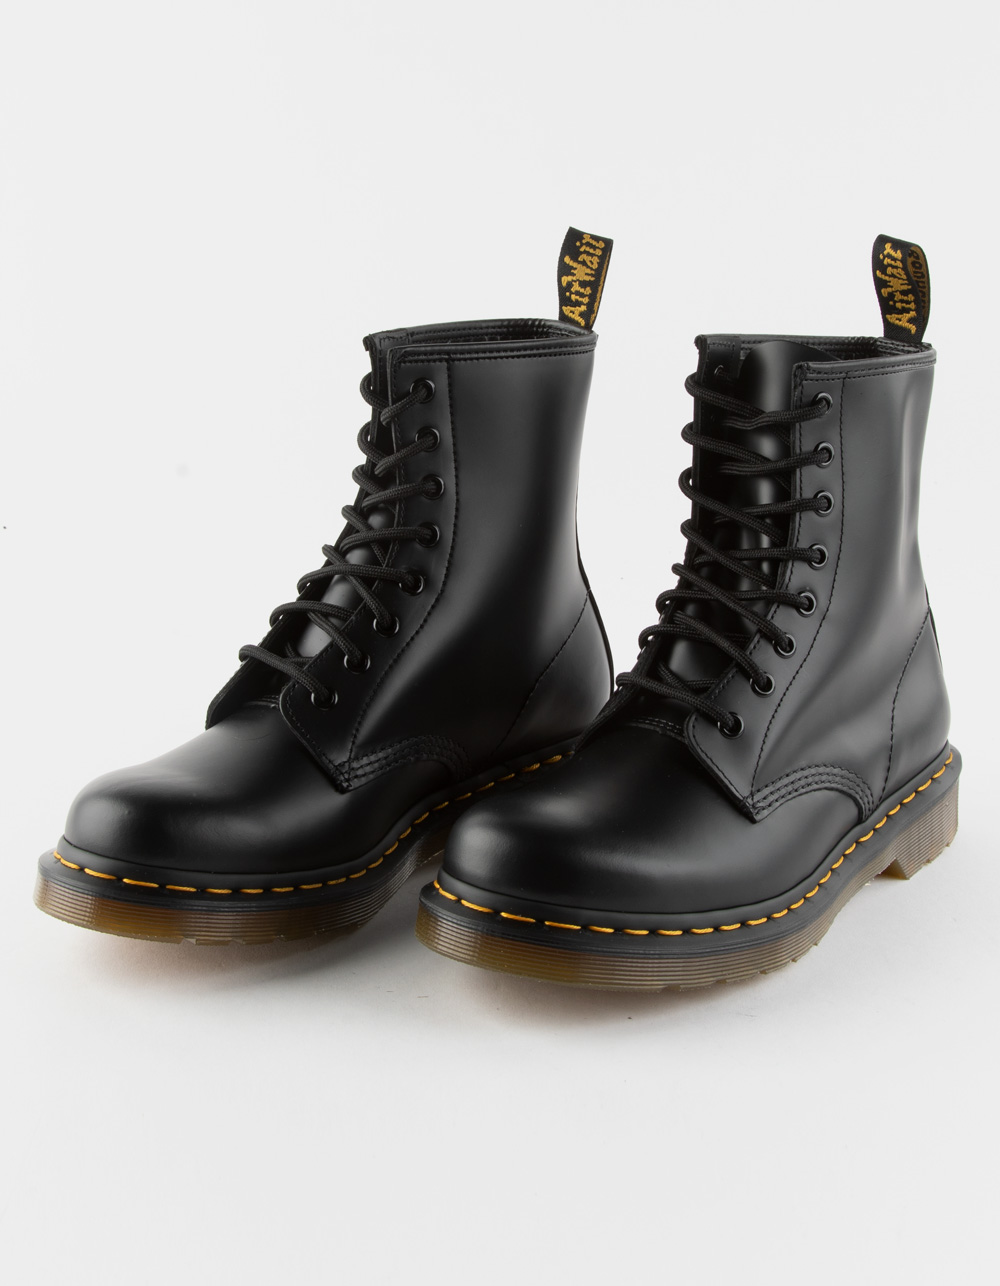 These Dr. Martens Boots Instantly Transform My Outfits